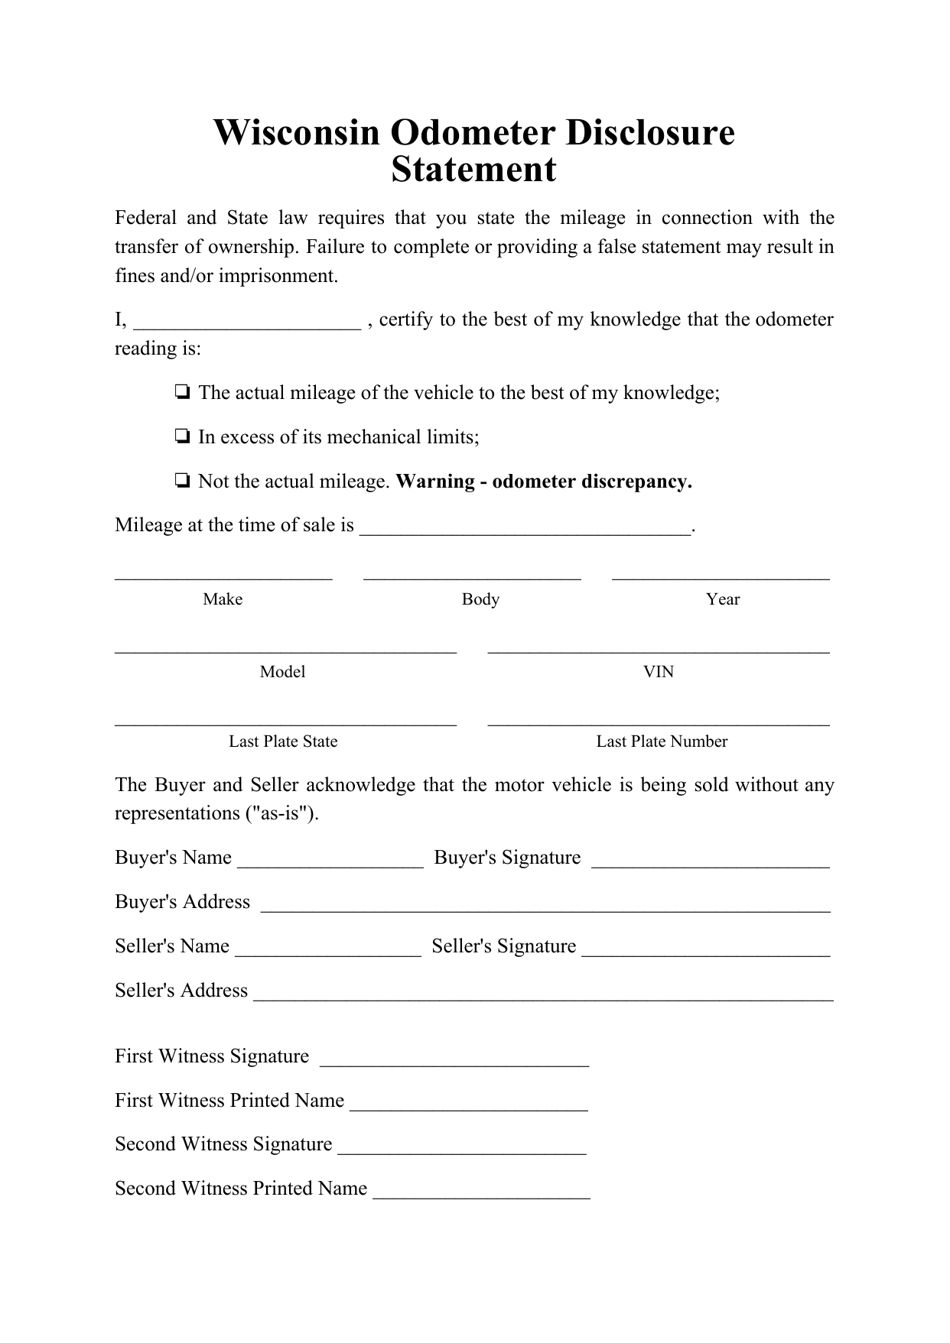 Odometer Disclosure Statement Form - Wisconsin, Page 1